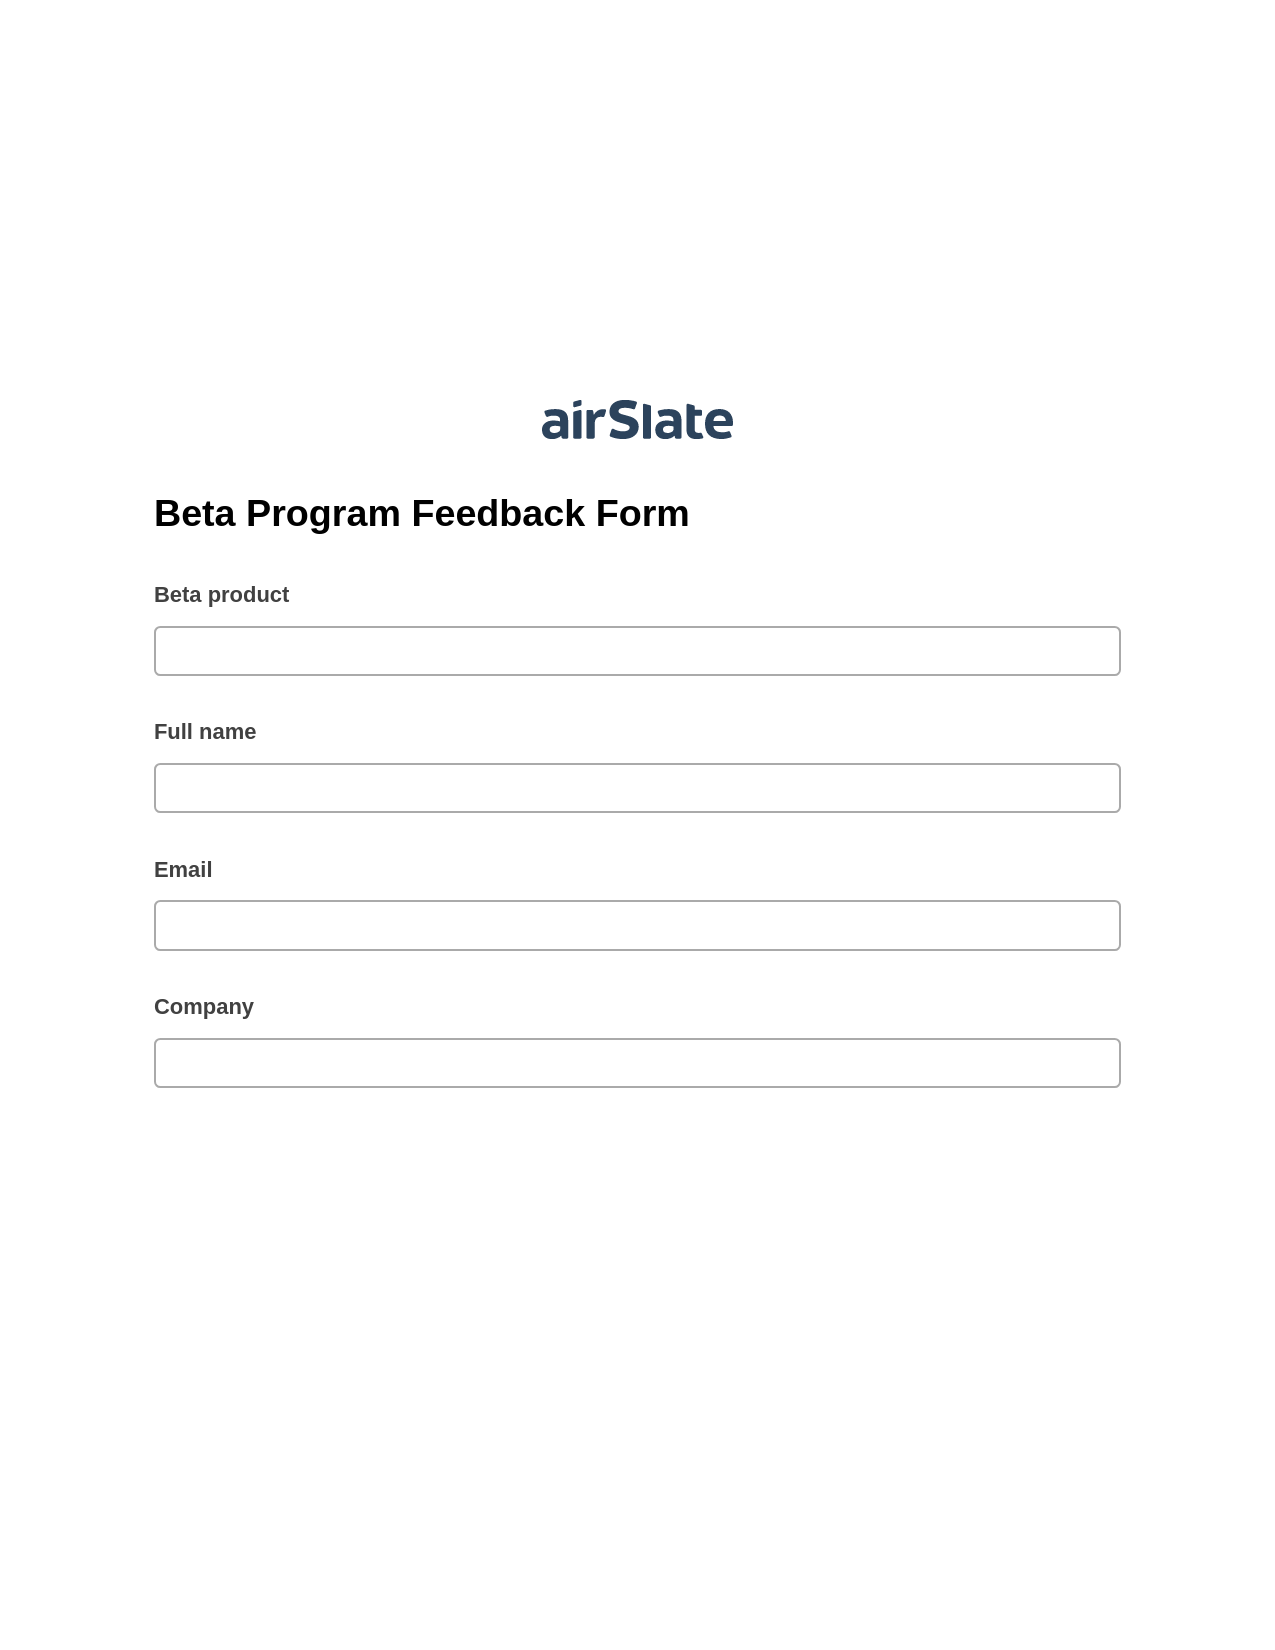 Multirole Beta Program Feedback Form Pre-fill from Salesforce Record Bot, Open as Role Bot, Export to Smartsheet